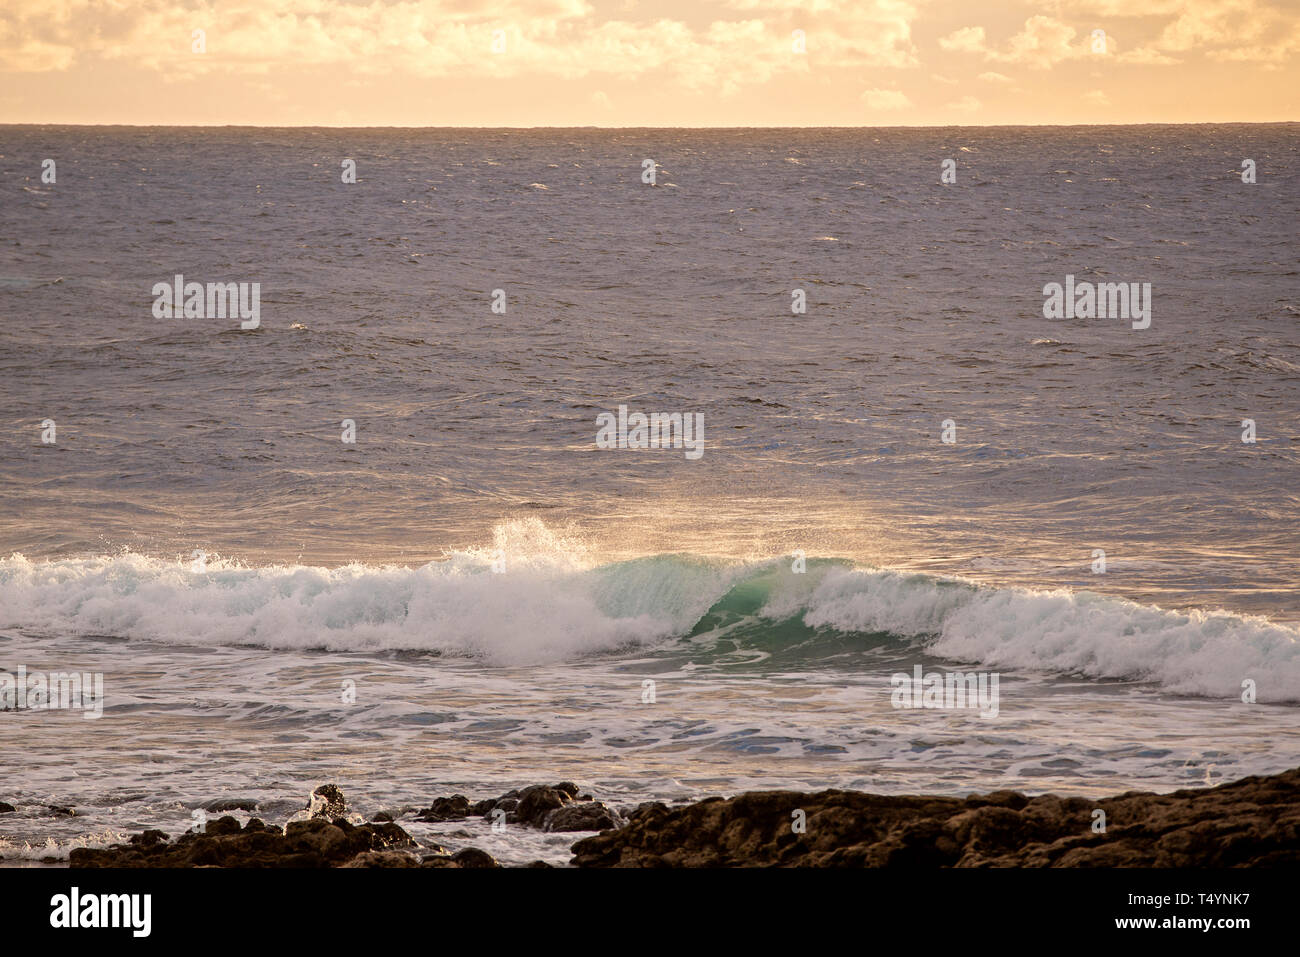 A big wave is crashing in the atlantic oecan near the island of Lanzarote during a beautiful sunset Stock Photo